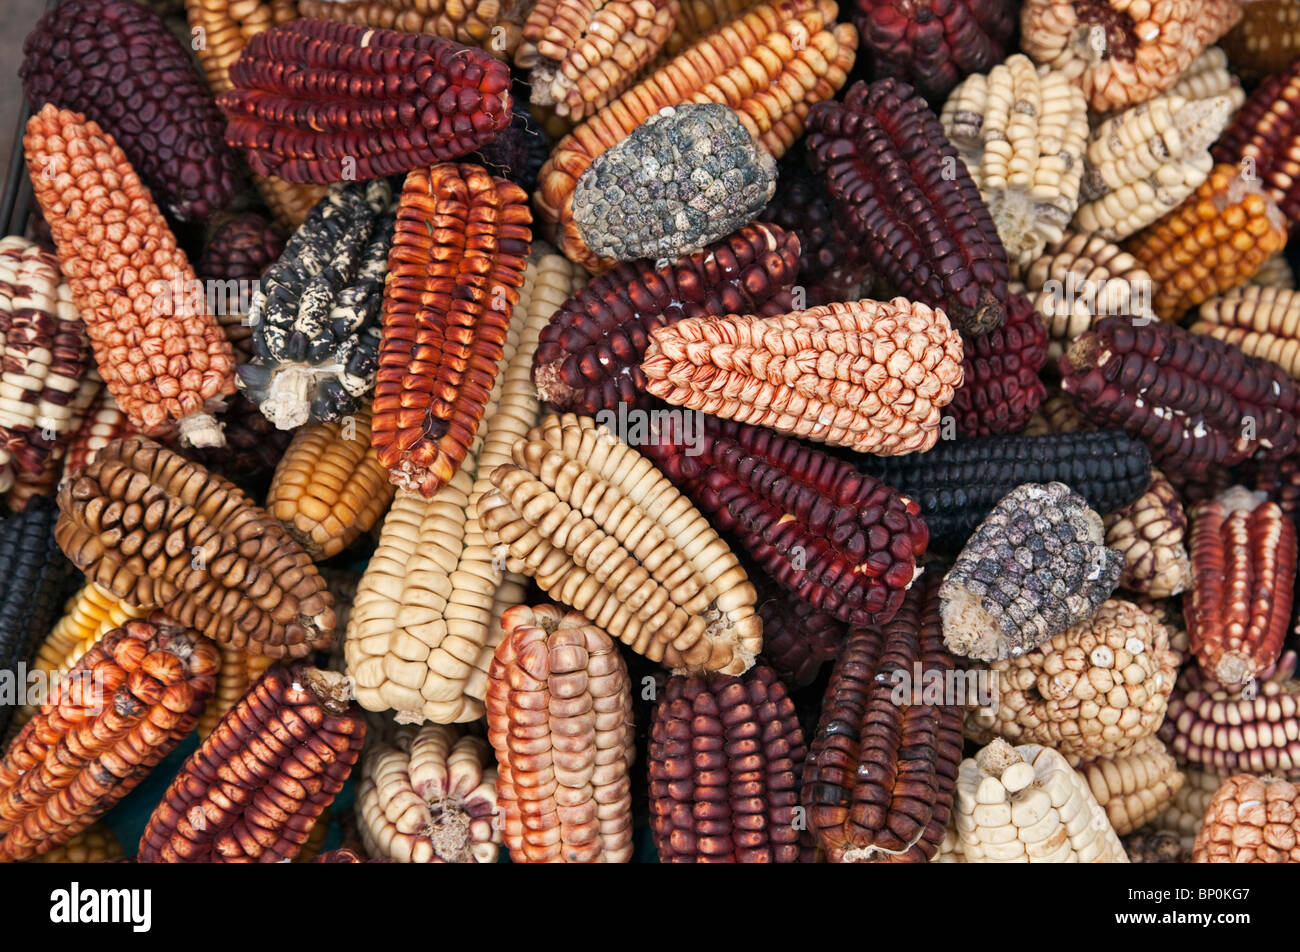 Peru. A large variety of maize cobs, or corn, displayed at Pisac market during the busy weekly Sunday market. Stock Photo